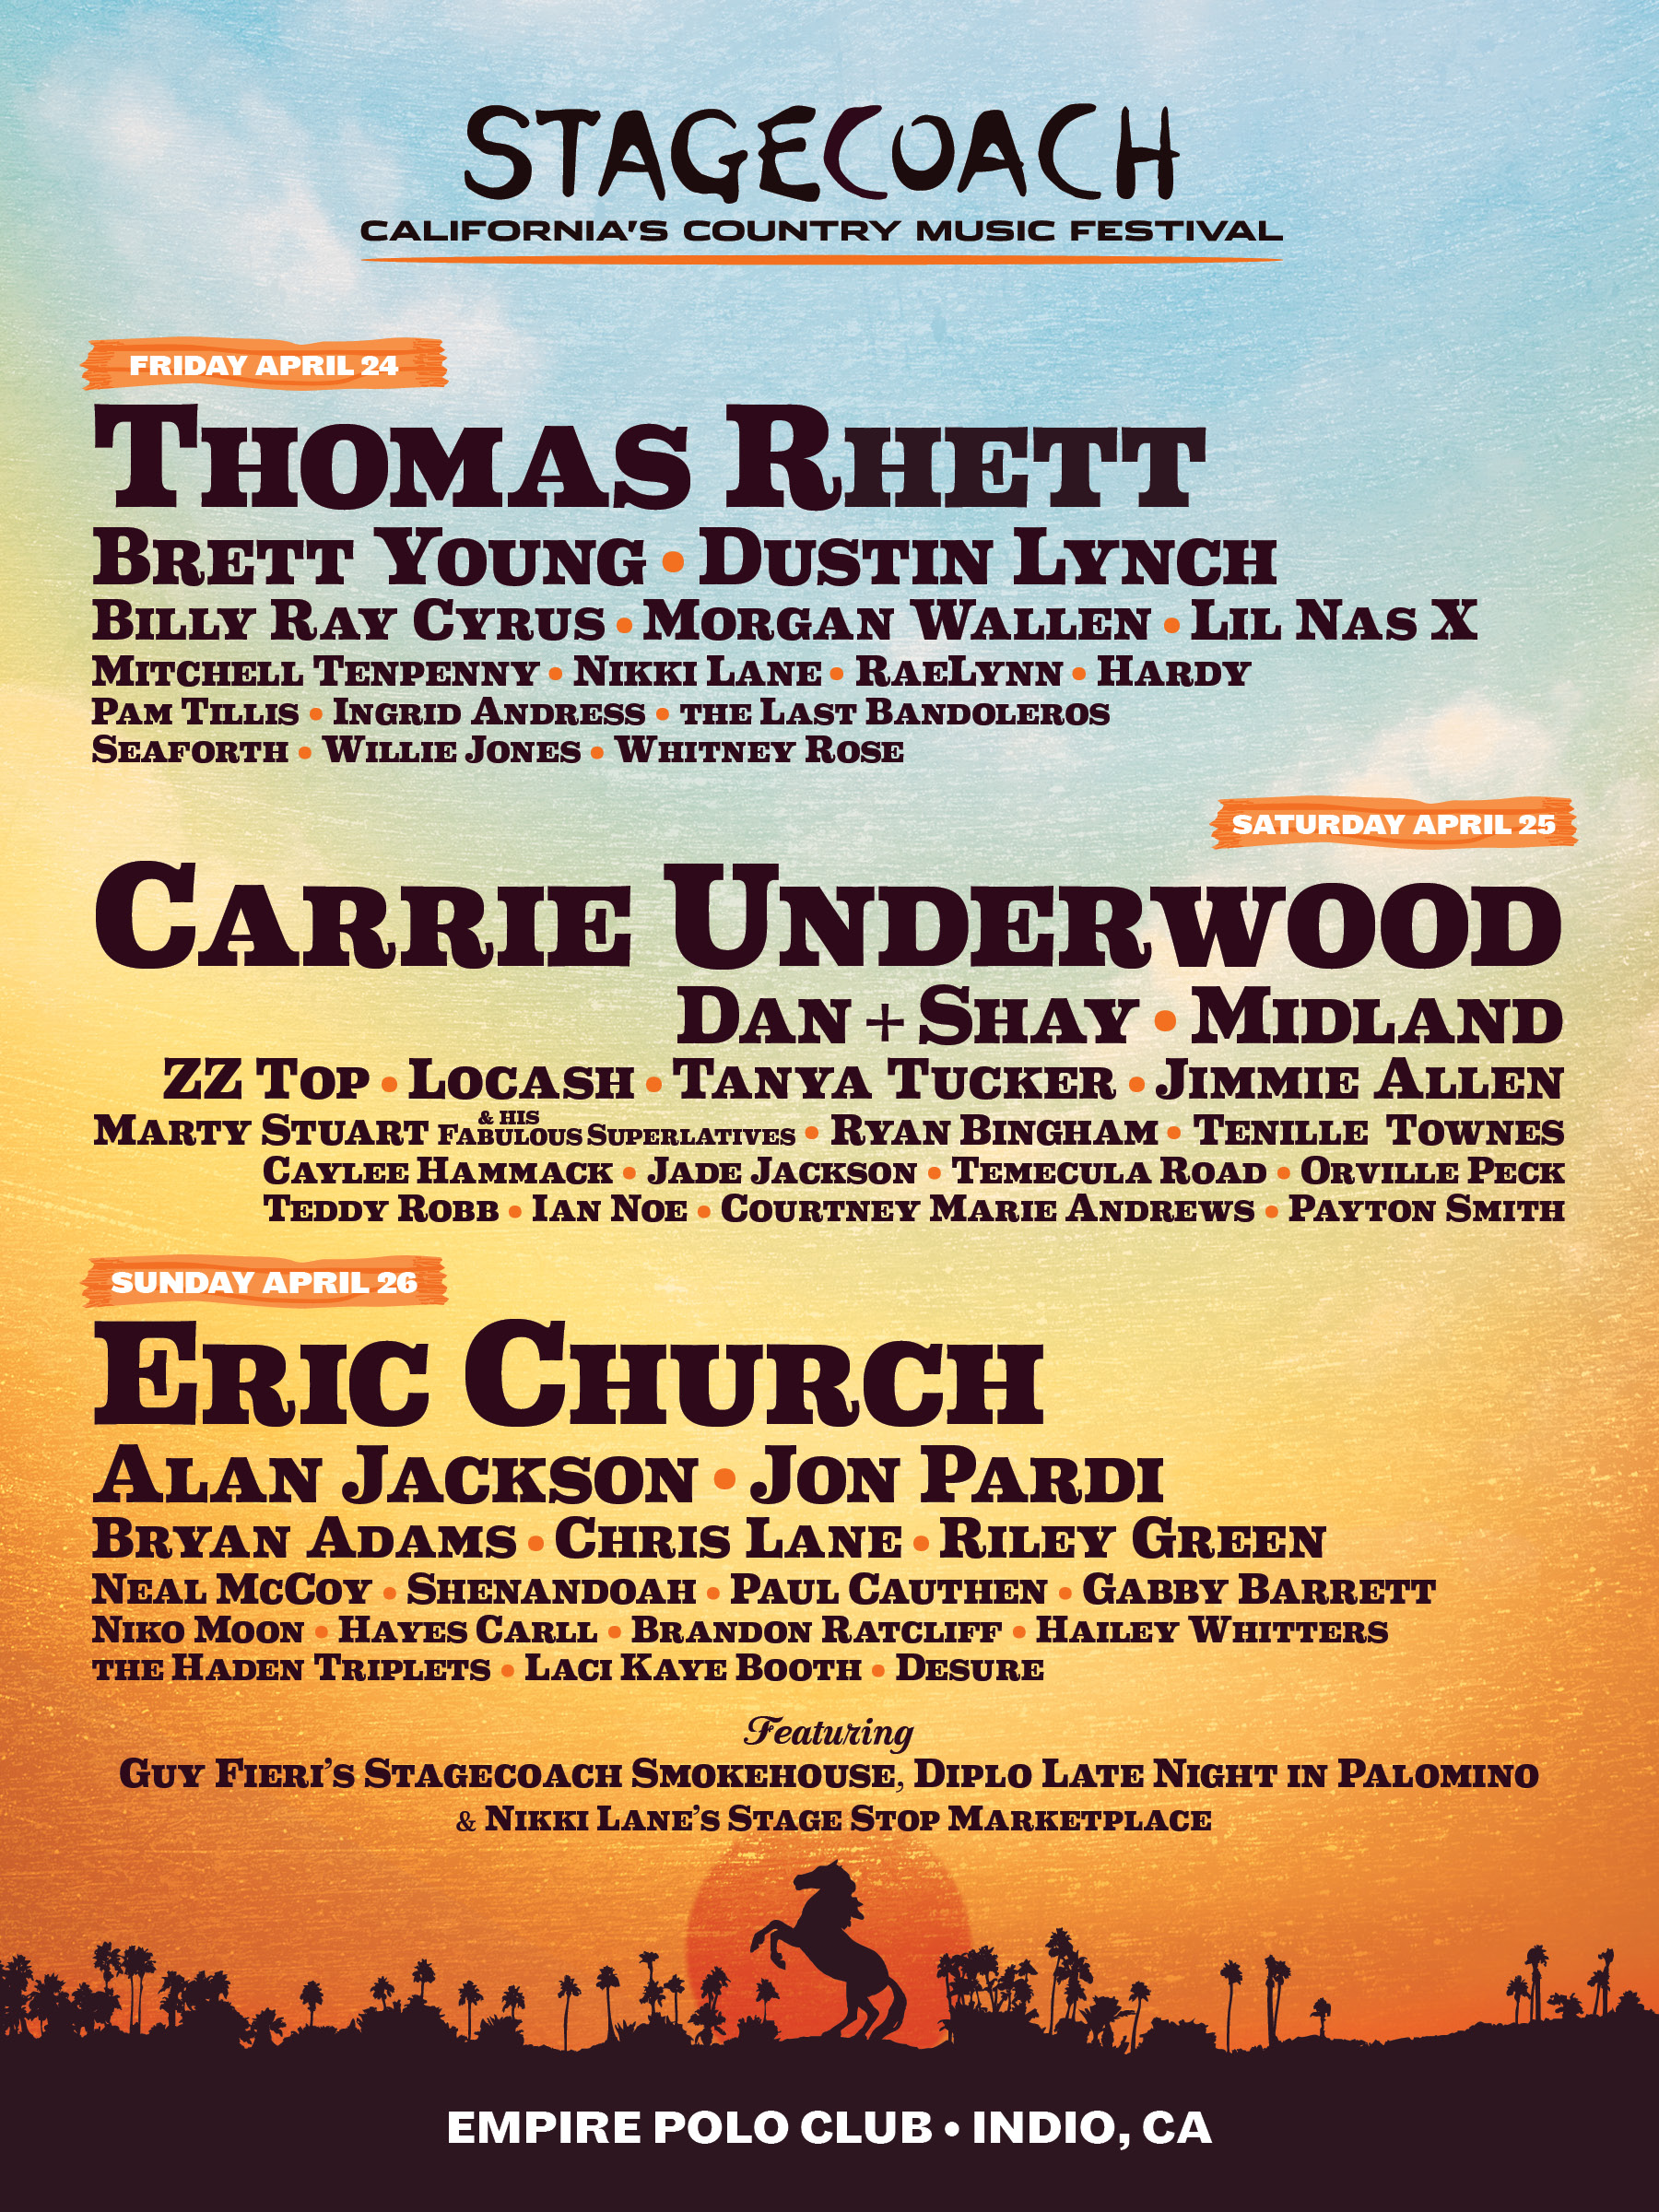 2020 Stagecoach Festival to Feature Exciting Lineup of Country Artists 1